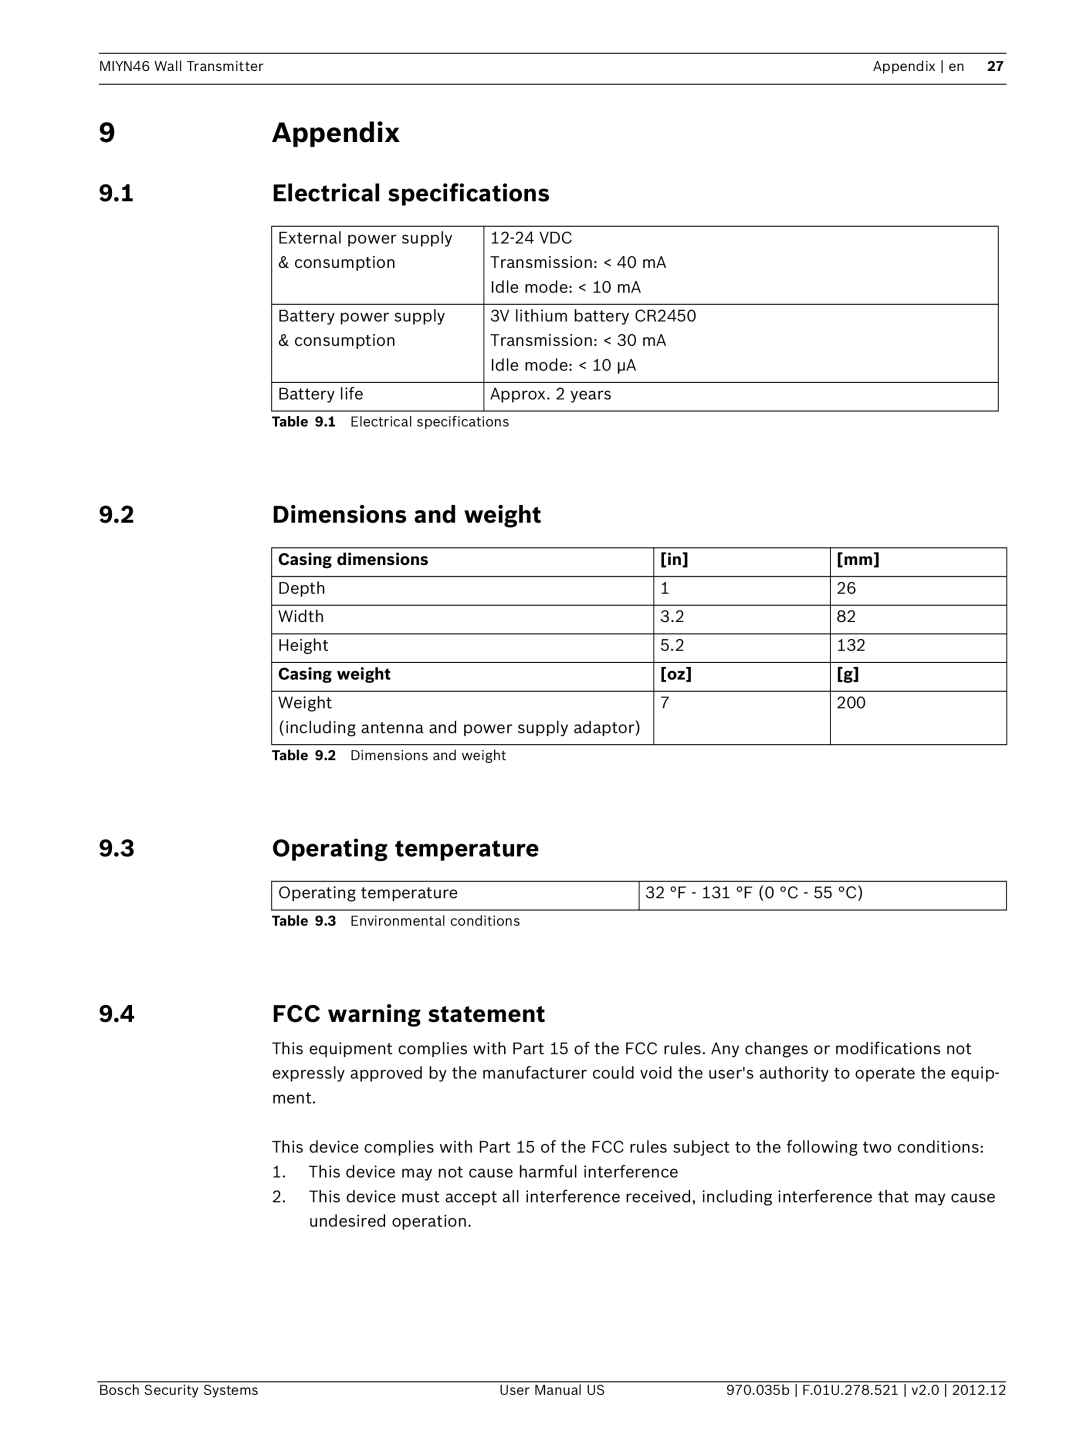 Bosch Appliances MIYN46 user manual Appendix, Electrical specifications, Dimensions and weight, Operating temperature 